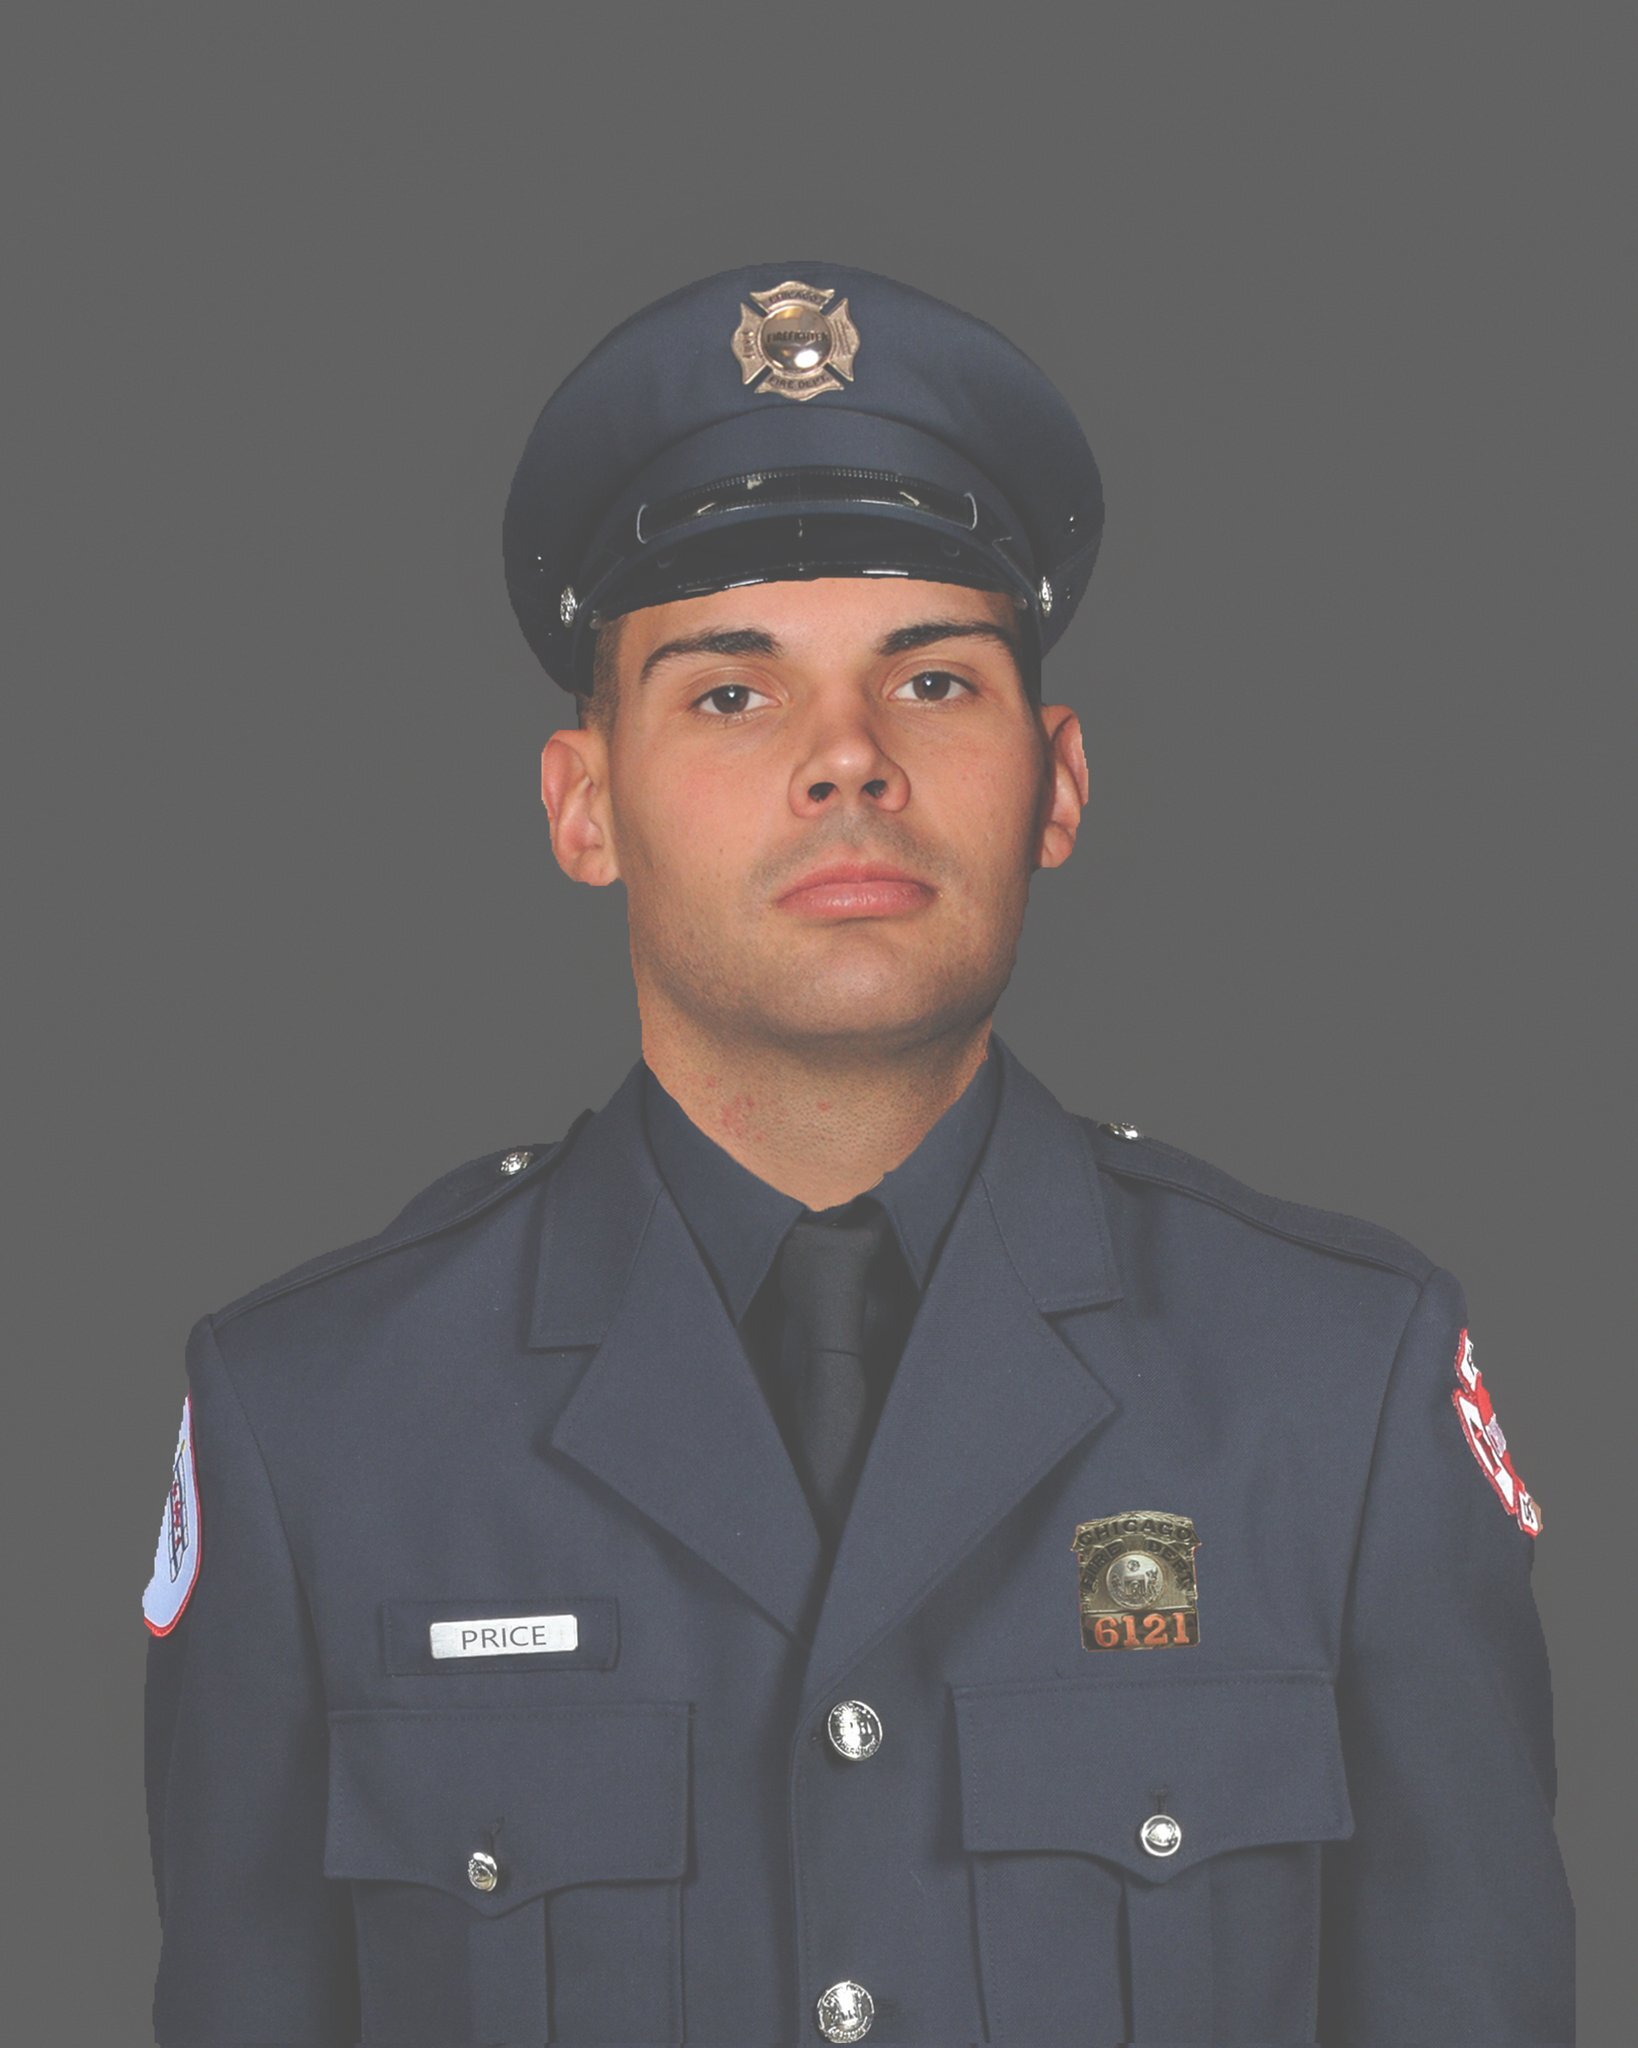 Services Set for Fallen Fire Fighter